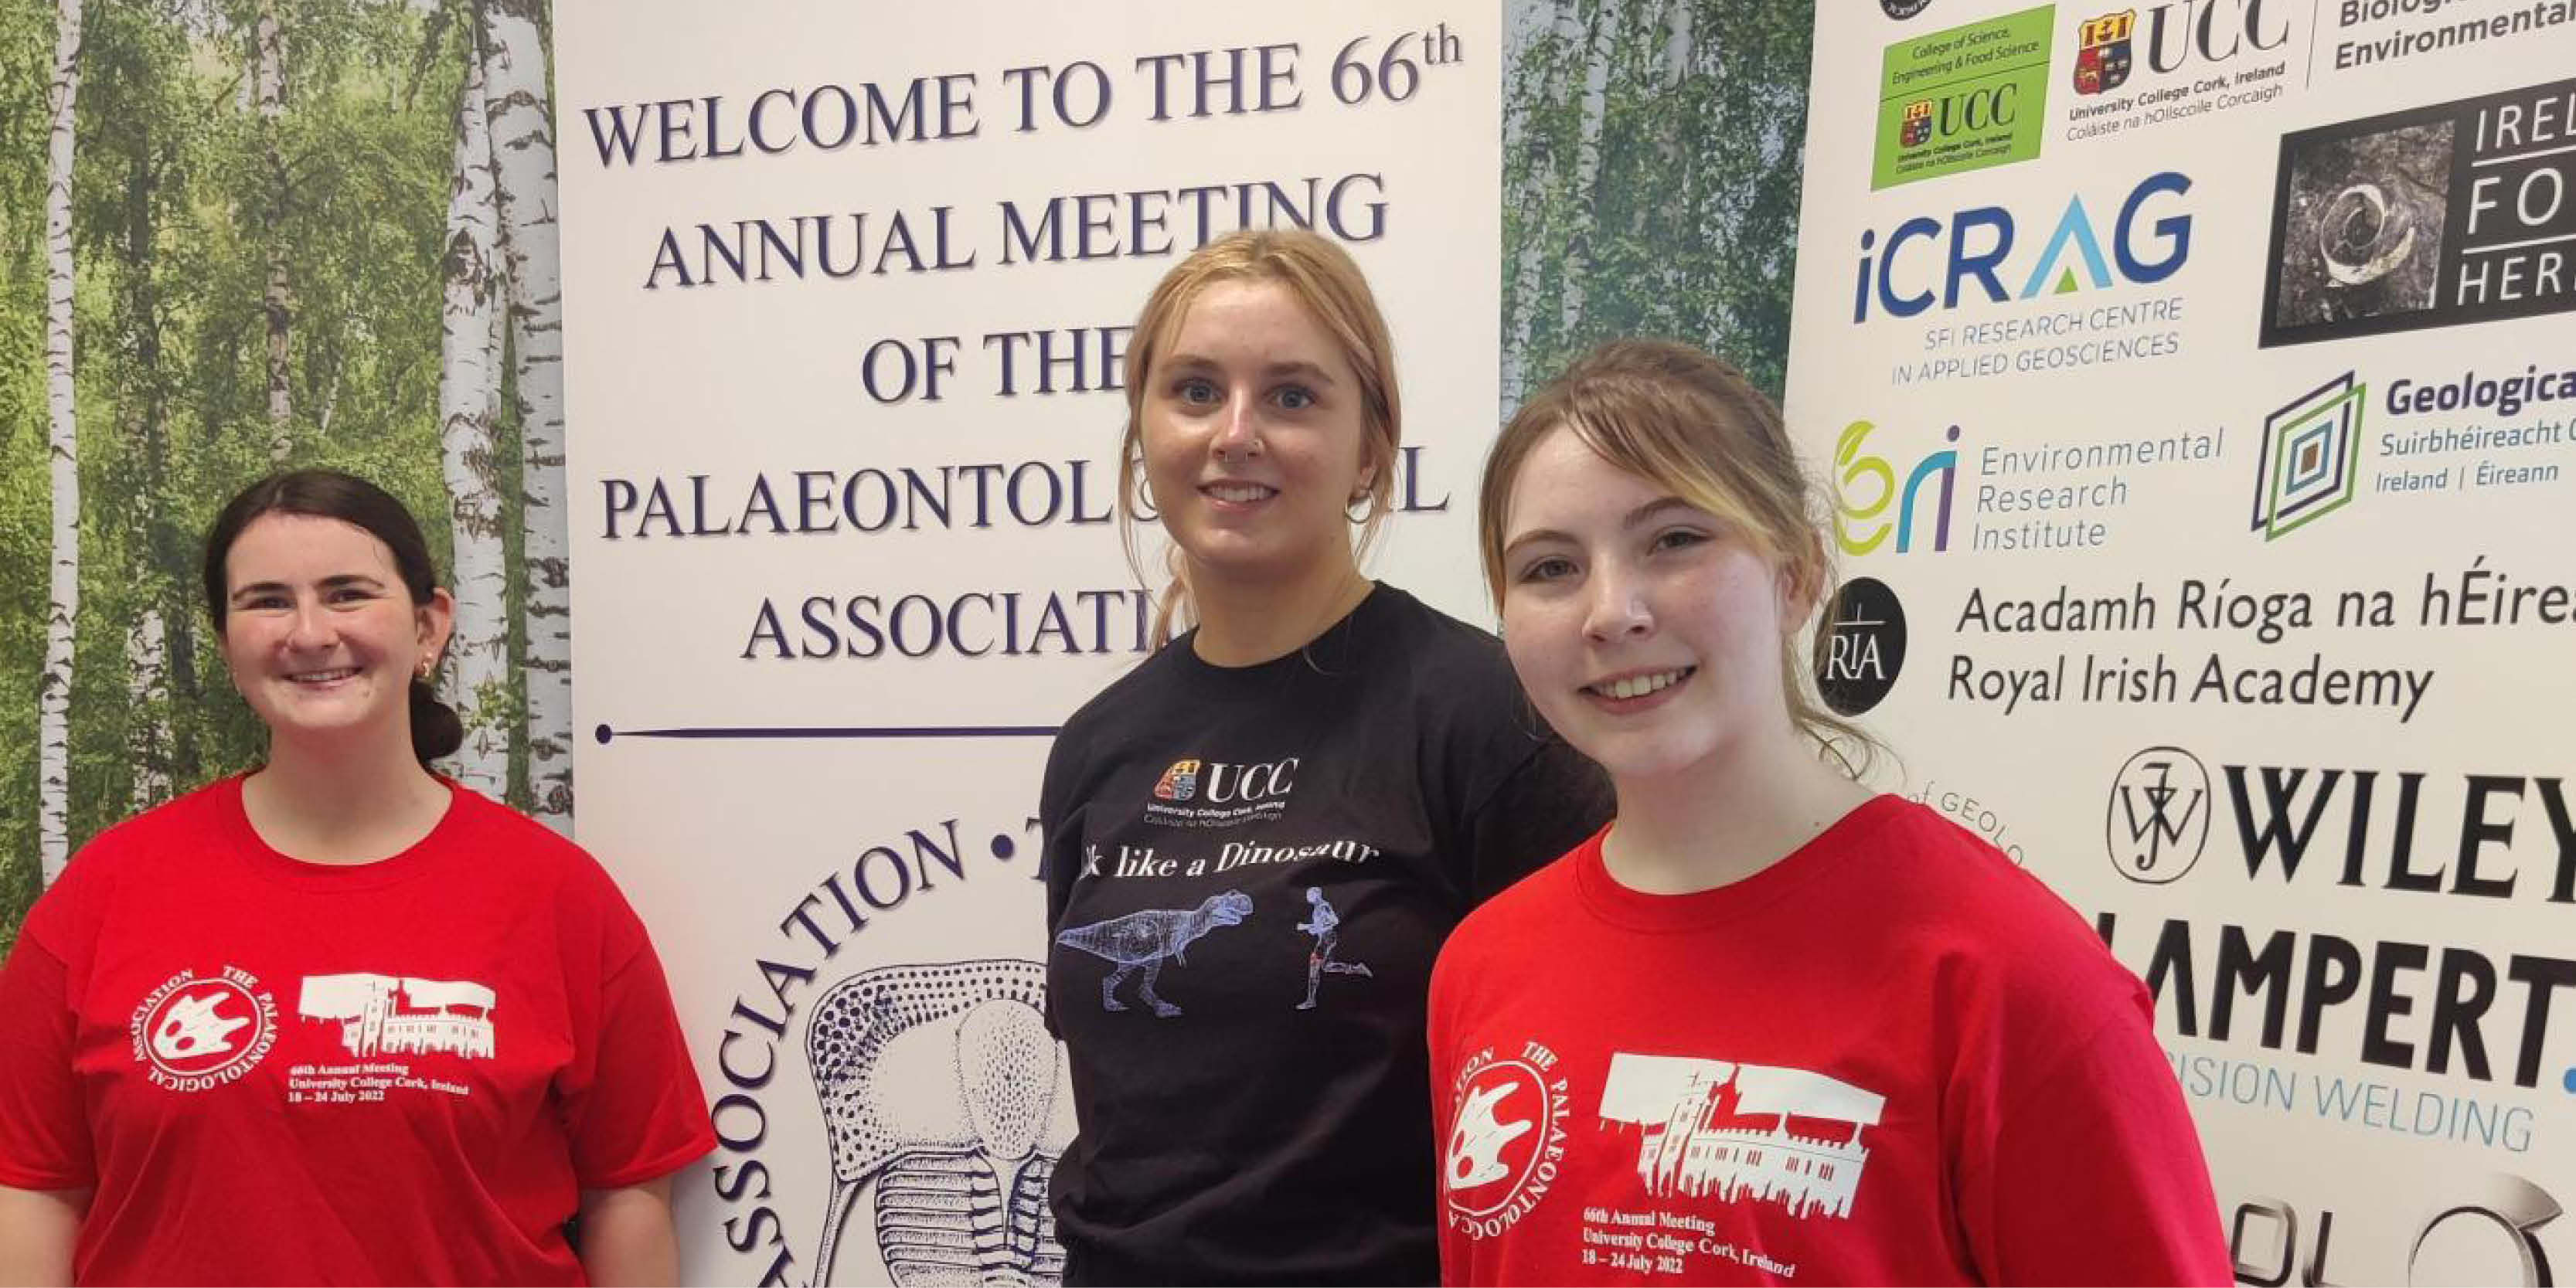 Palaeontology experts gather at UCC for annual conference